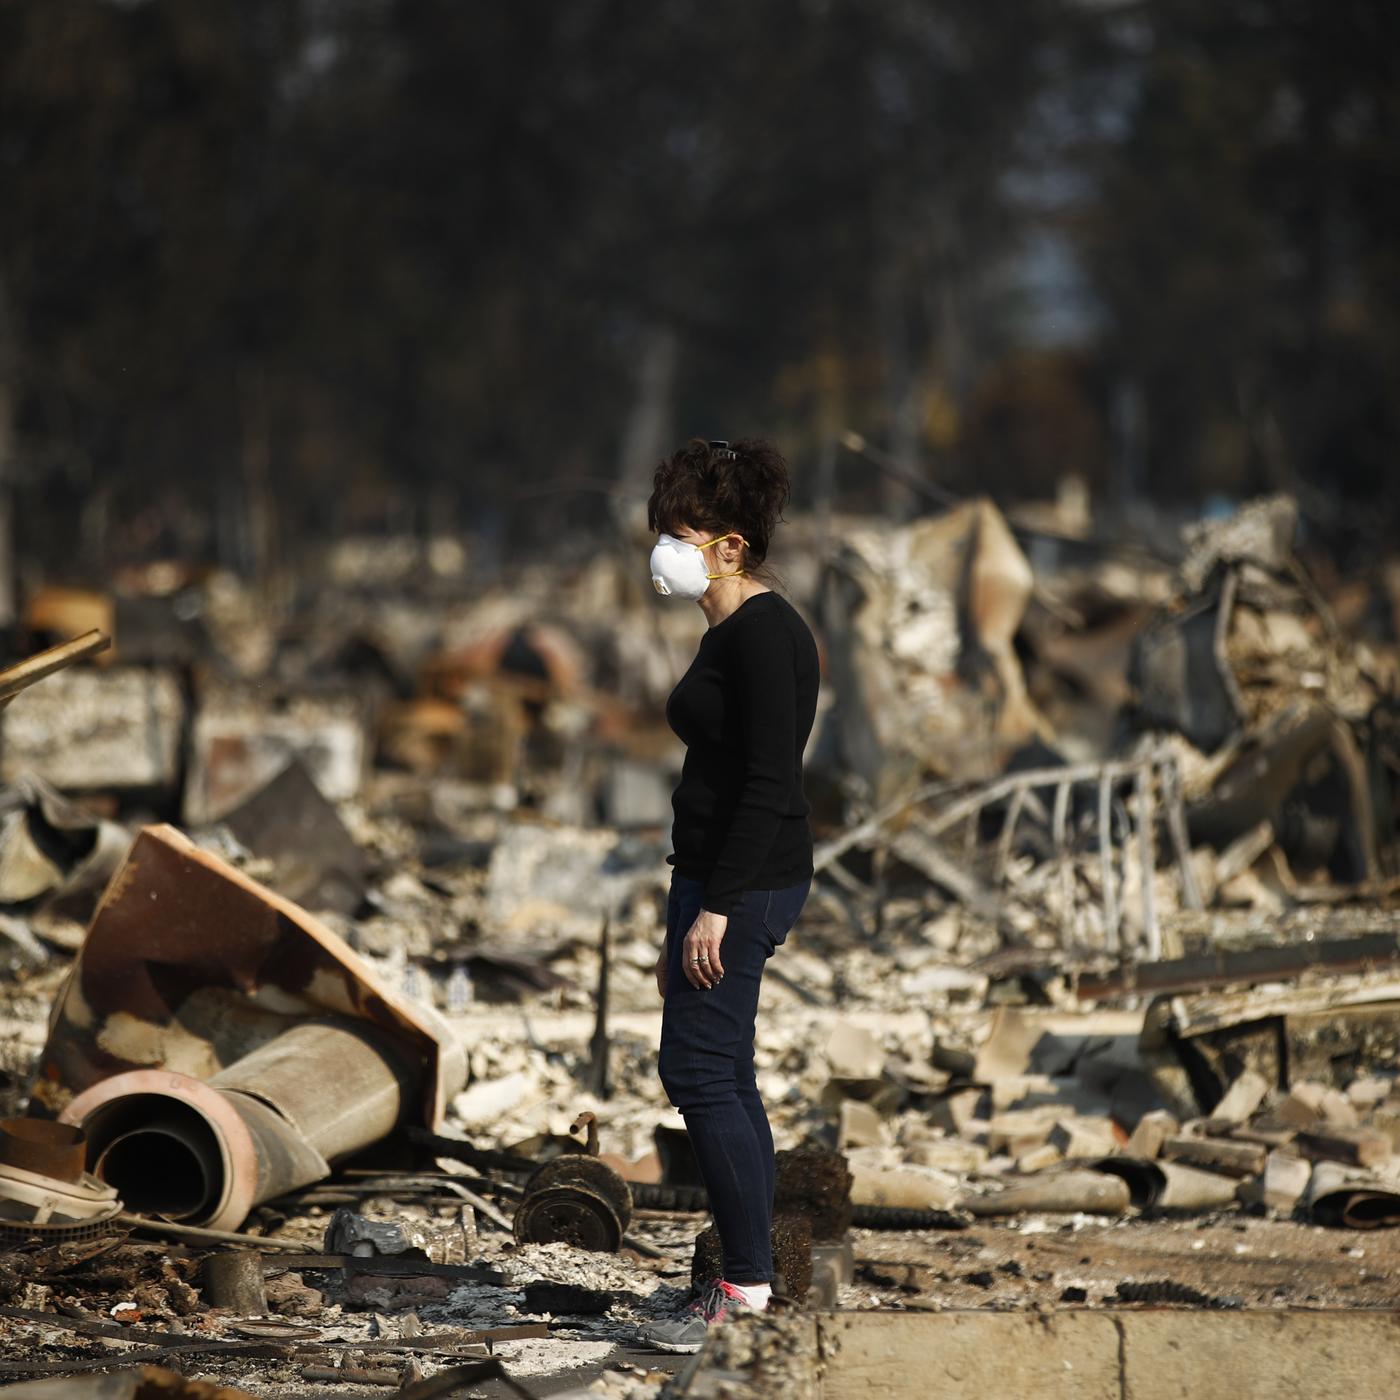 California Fire Victims Navigate Web of Insurance Woes